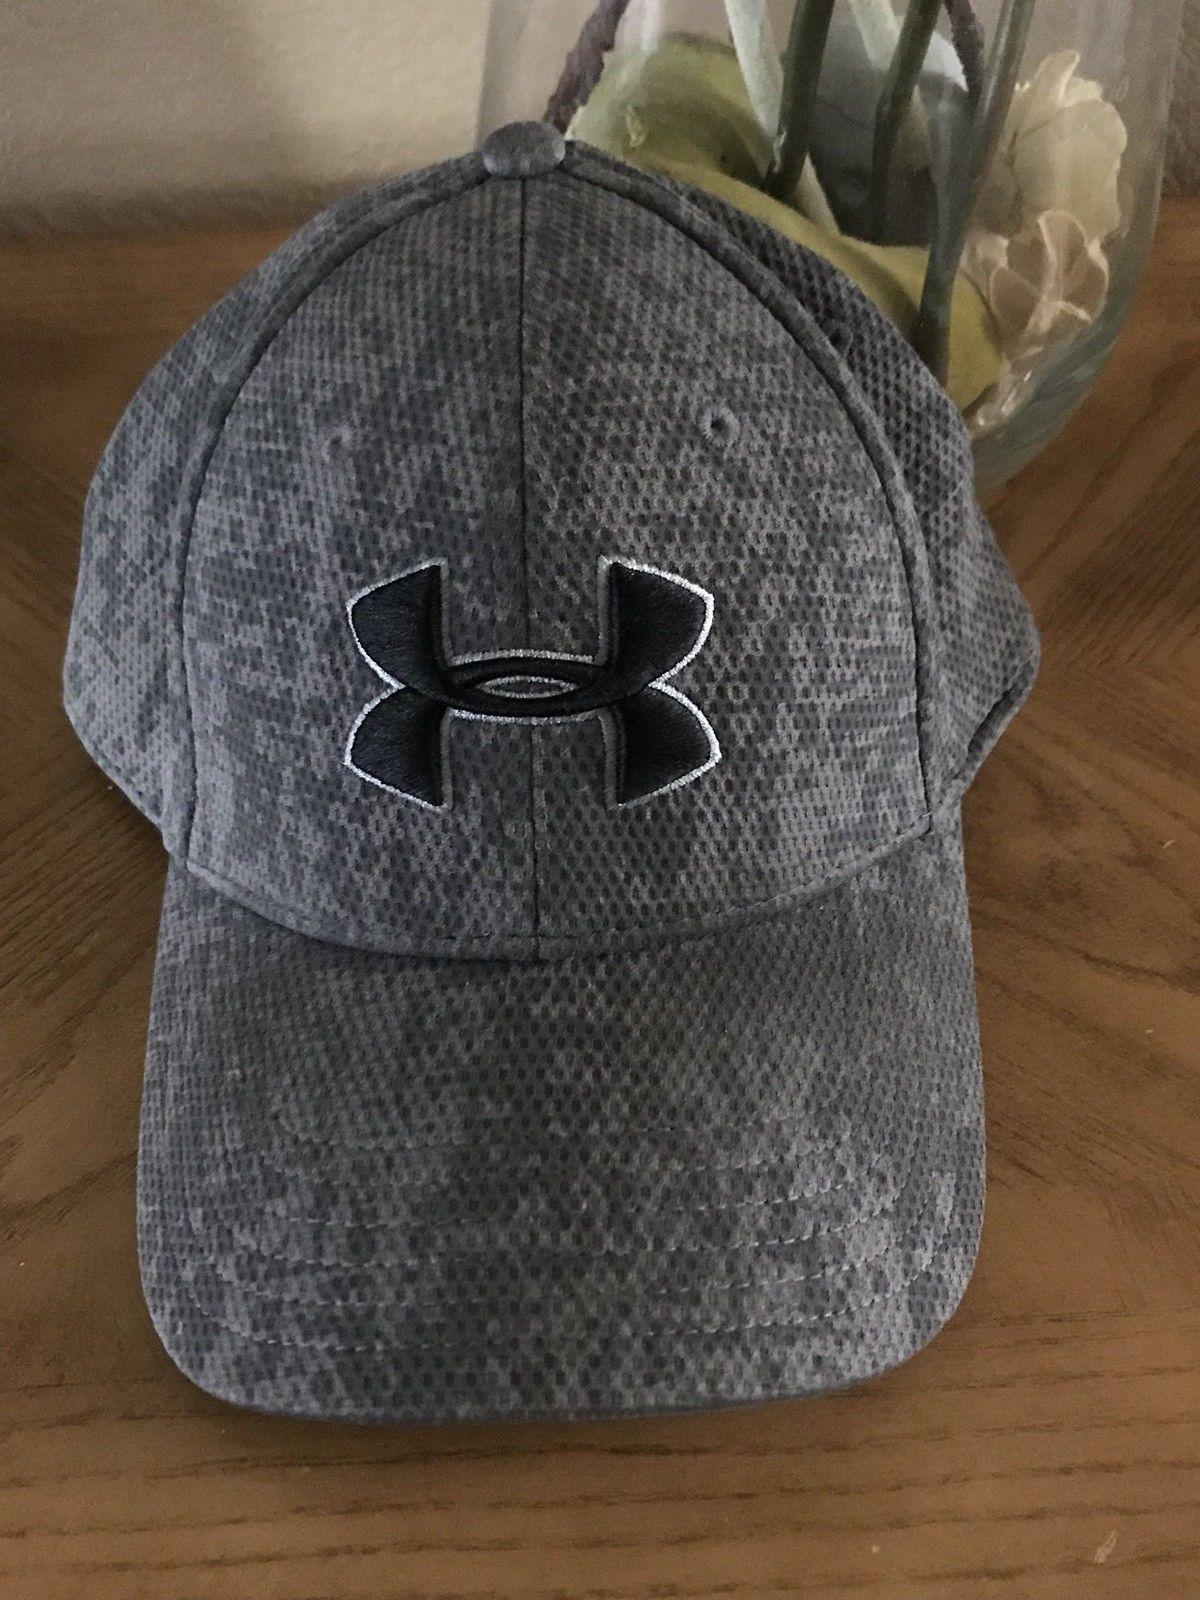 Digital Camo Under Armour Logo - Fitted Under Armour Grey Shaded Digital XL Camo Hat LG / XL Digital